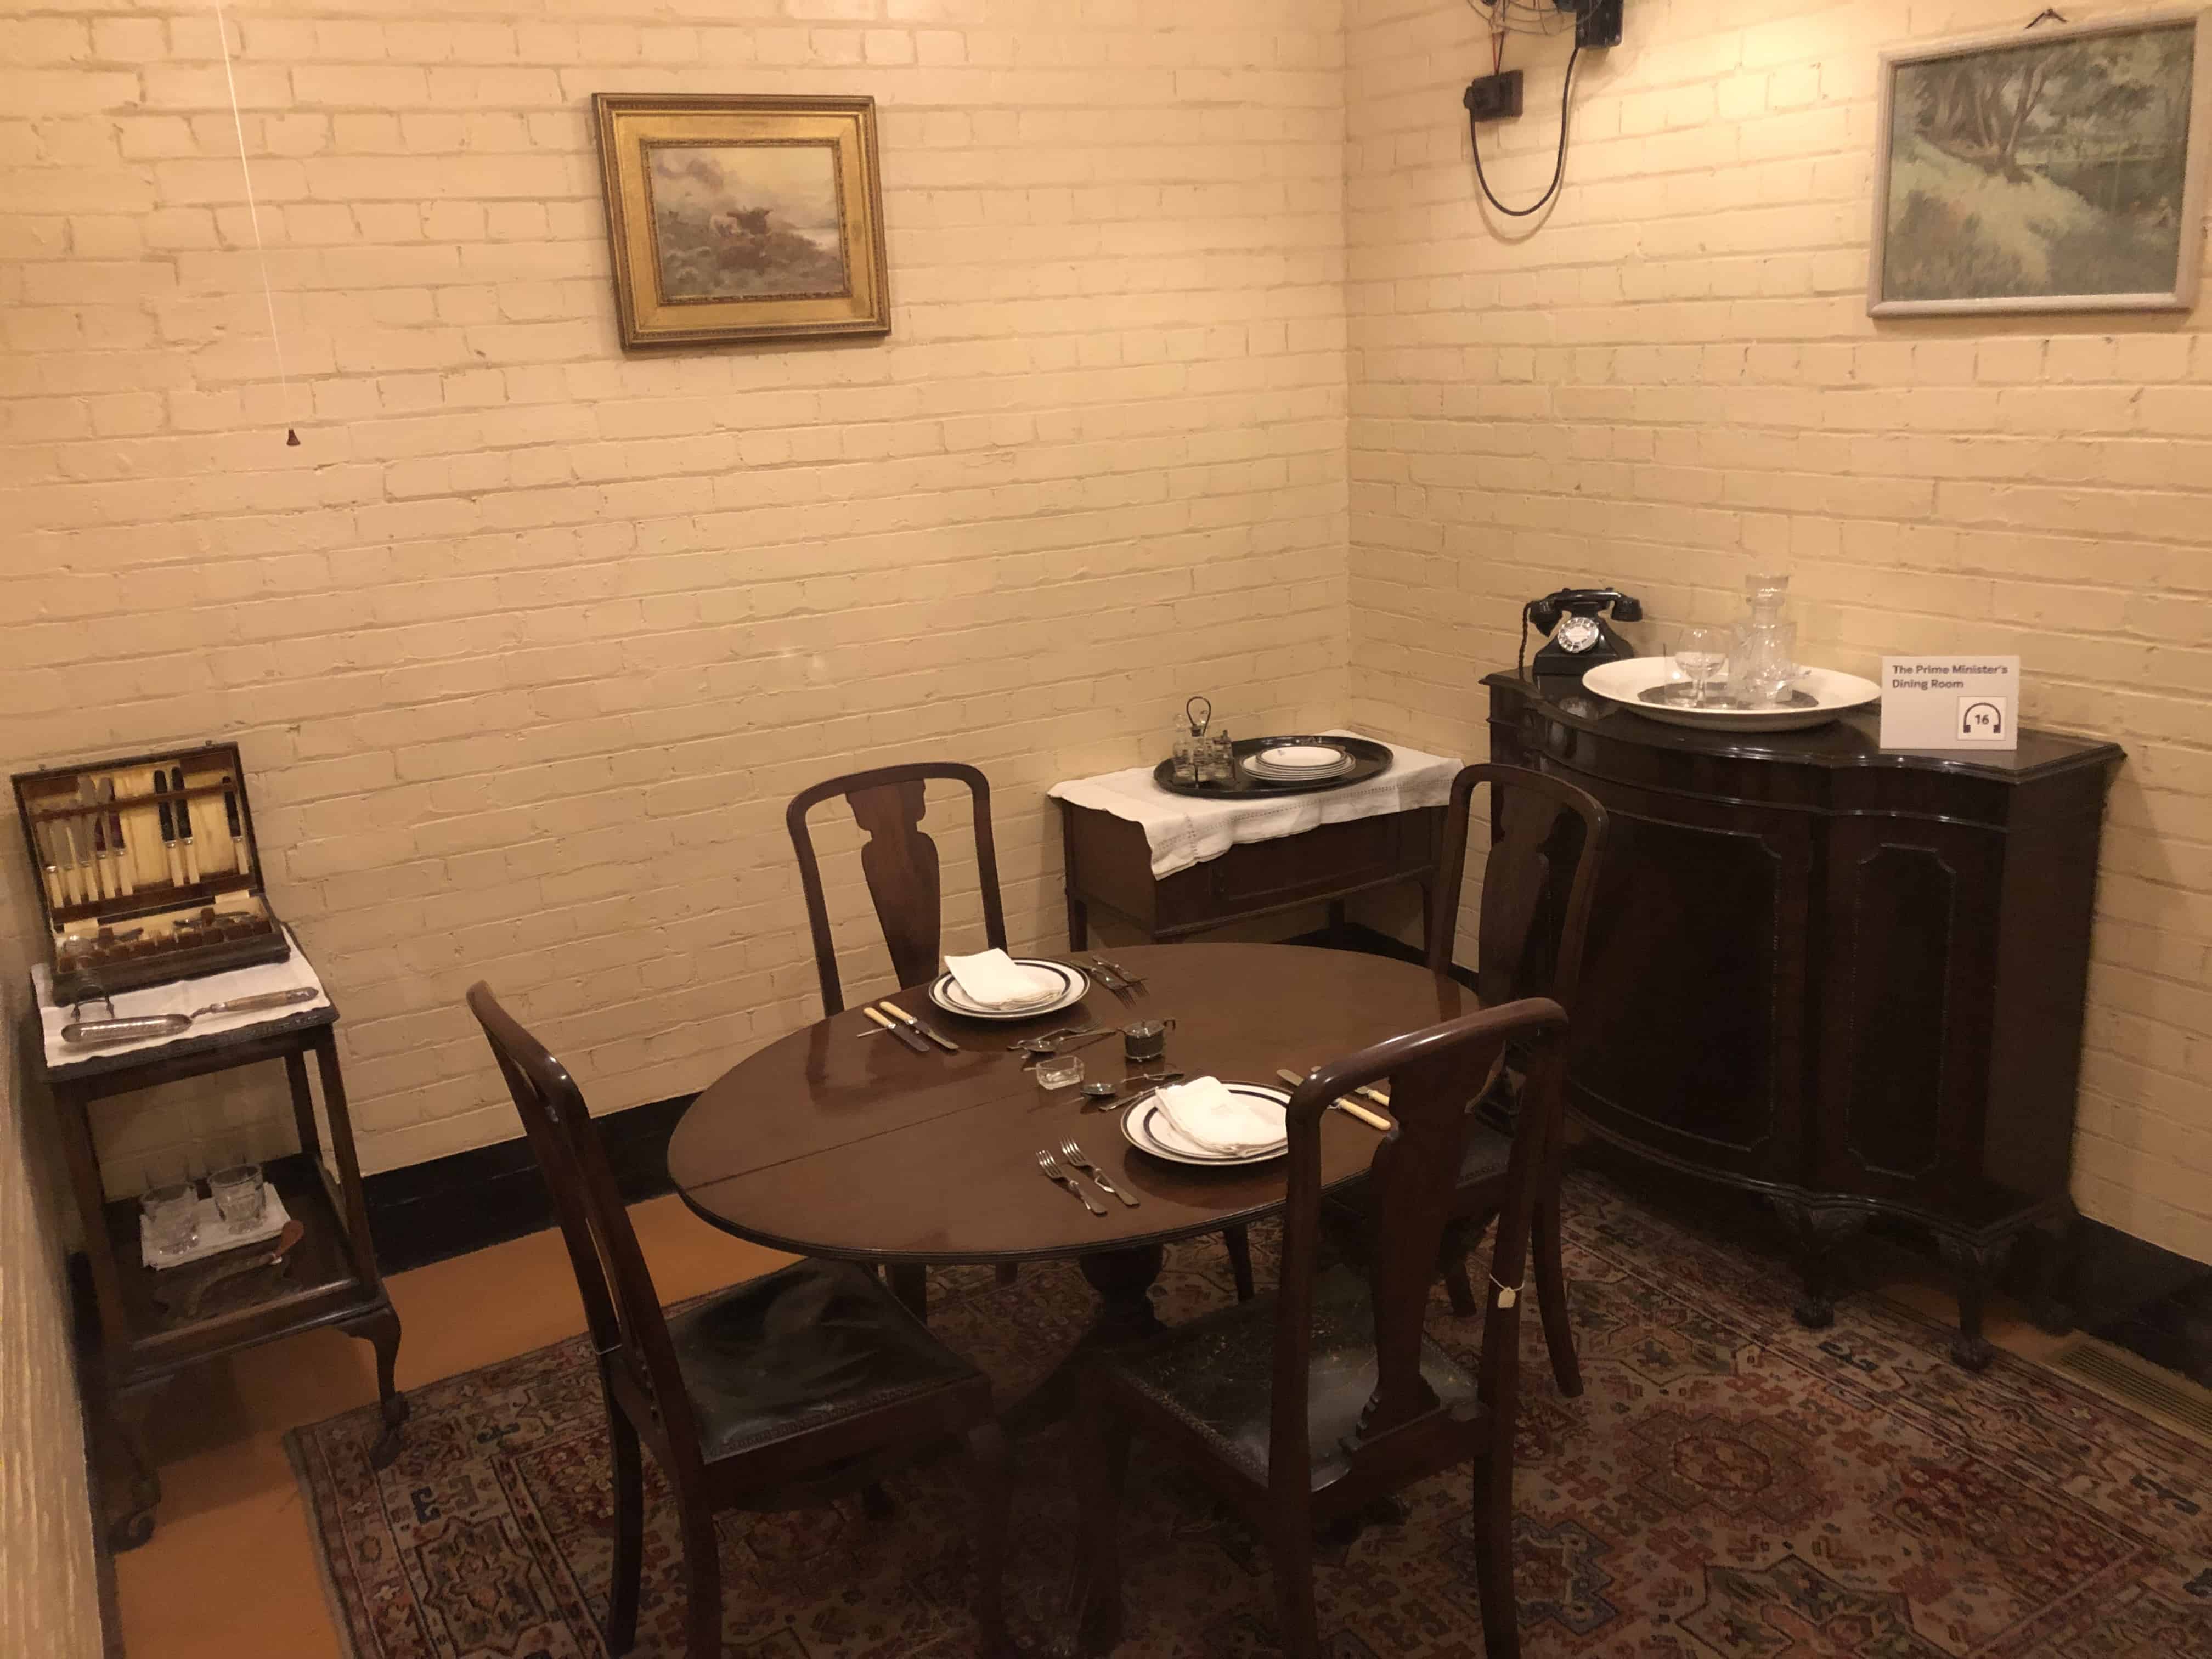 Prime Minister's Dining Room